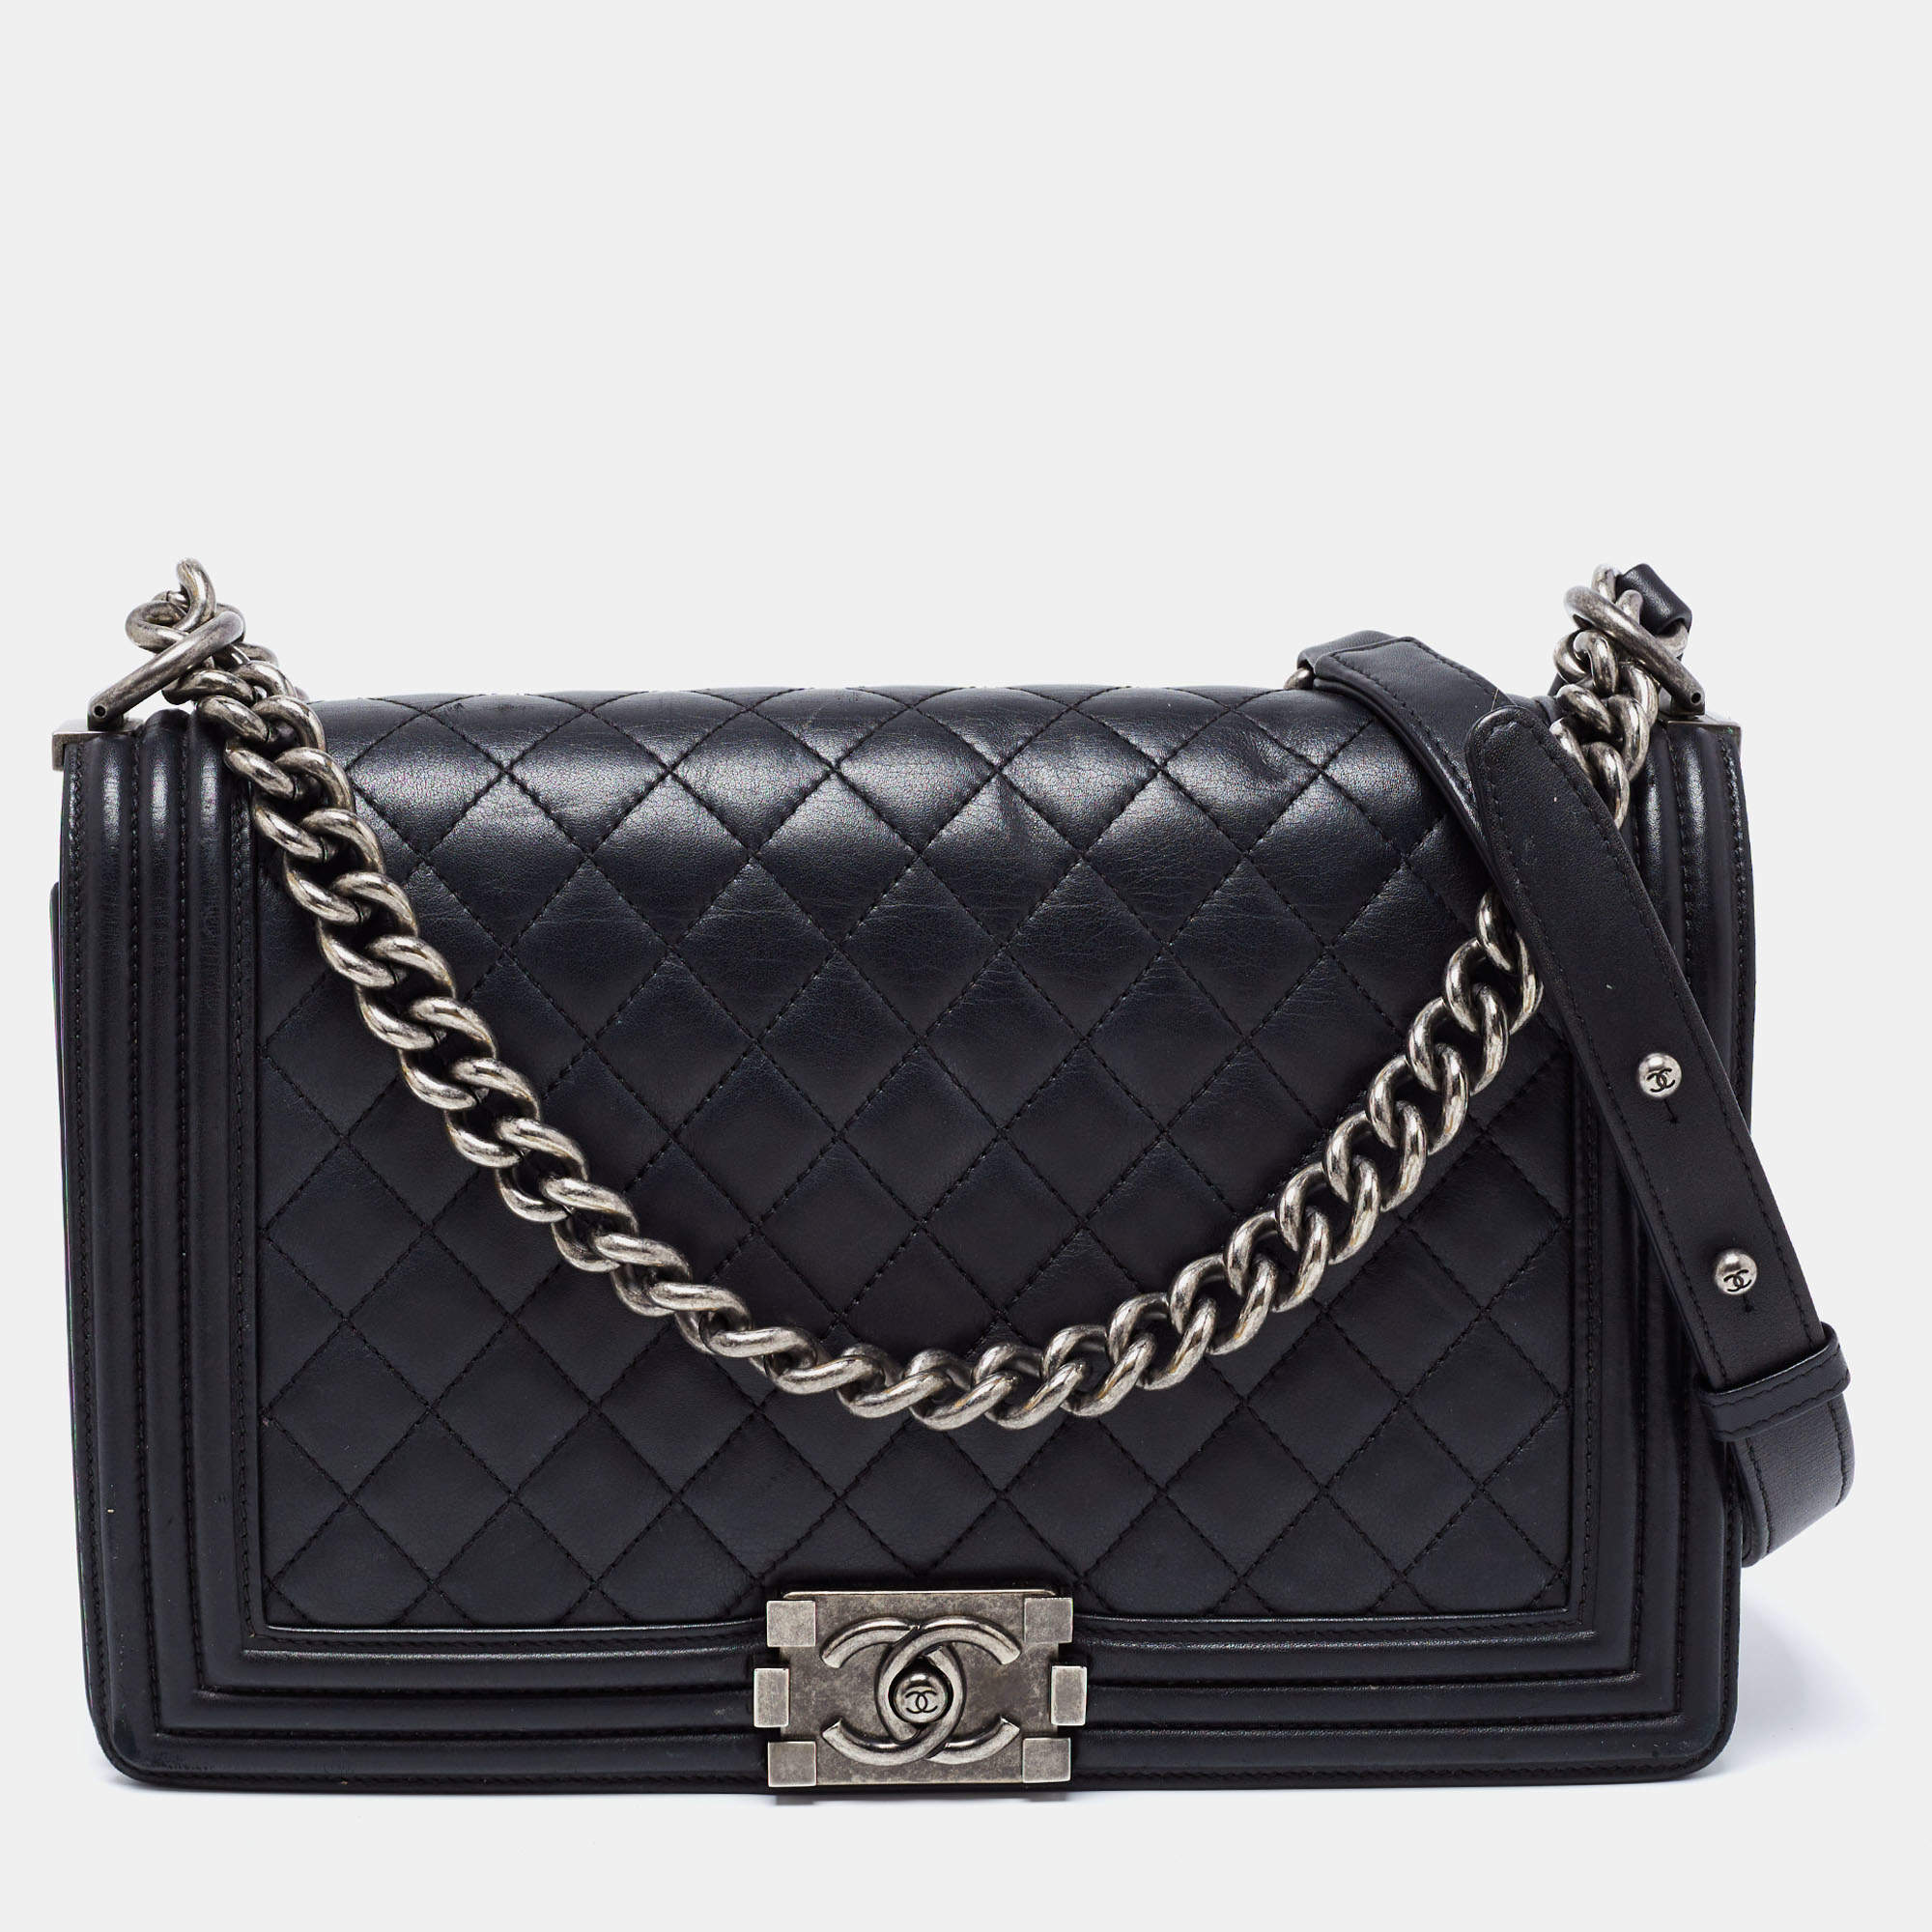 Chanel Black Quilted Leather New Medium Boy Flap Bag